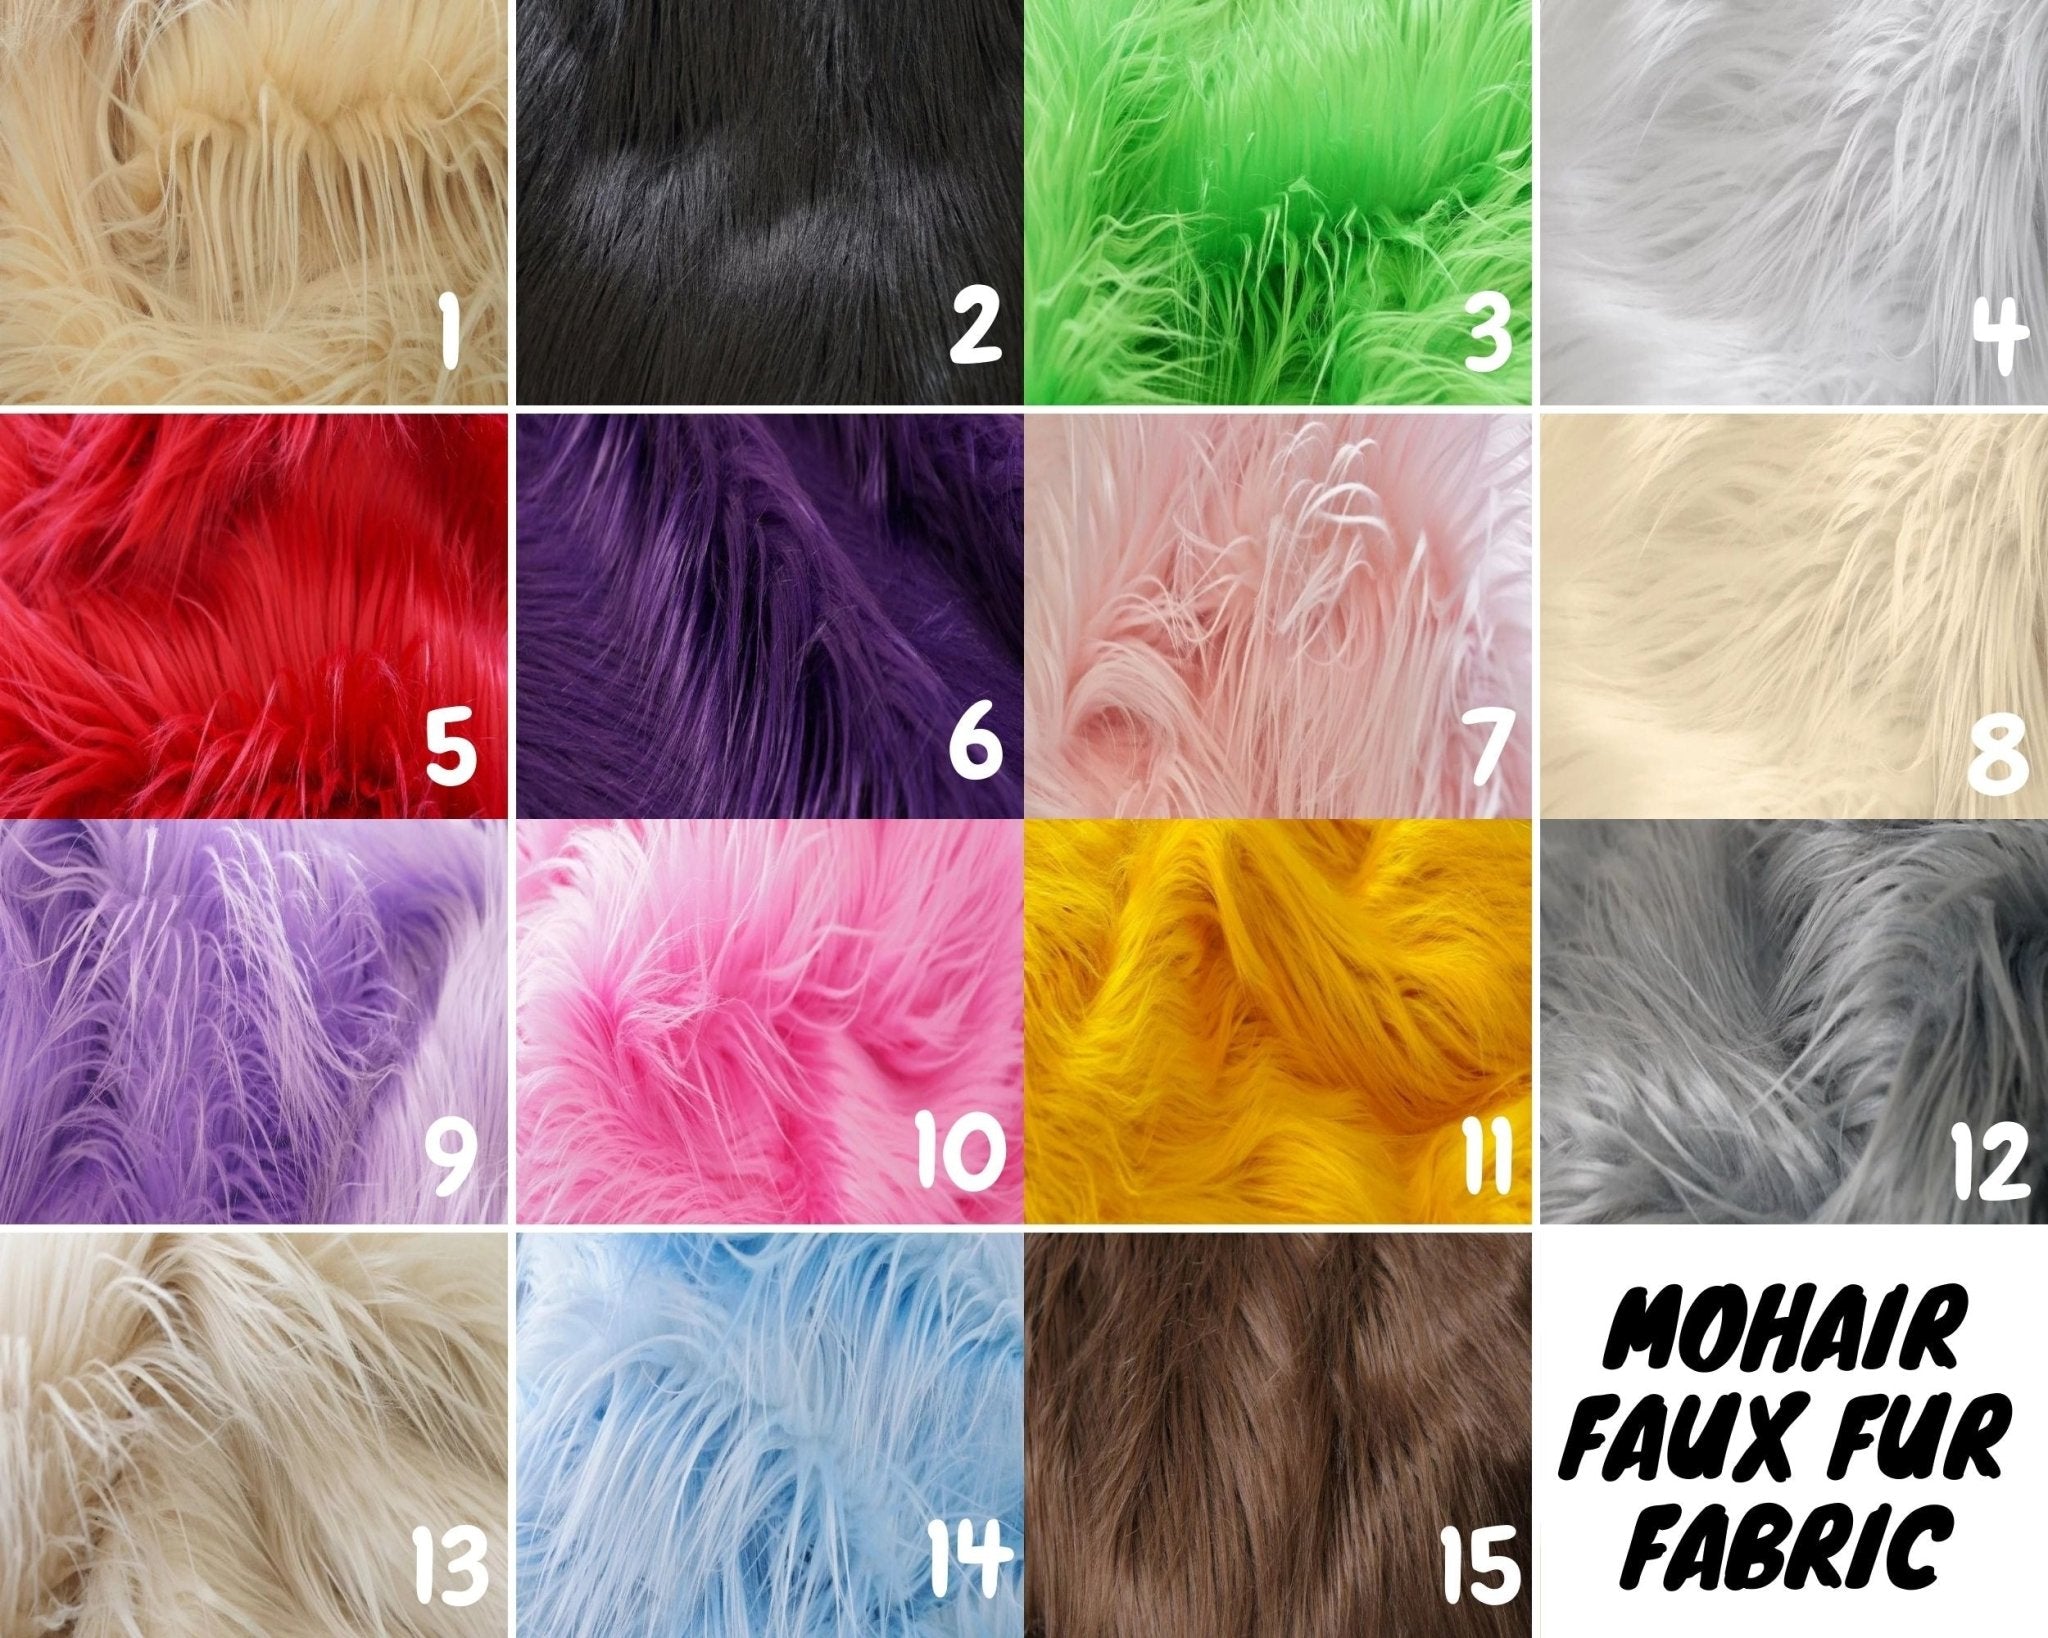 Mohair Faux Fur Fabric By The Roll (20 Yards) 4 Inch PileICE FABRICSICE FABRICSBlackBy The Roll (60" Wide)Mohair Faux Fur Fabric By The Roll (20 Yards) 4 Inch Pile ICE FABRICS